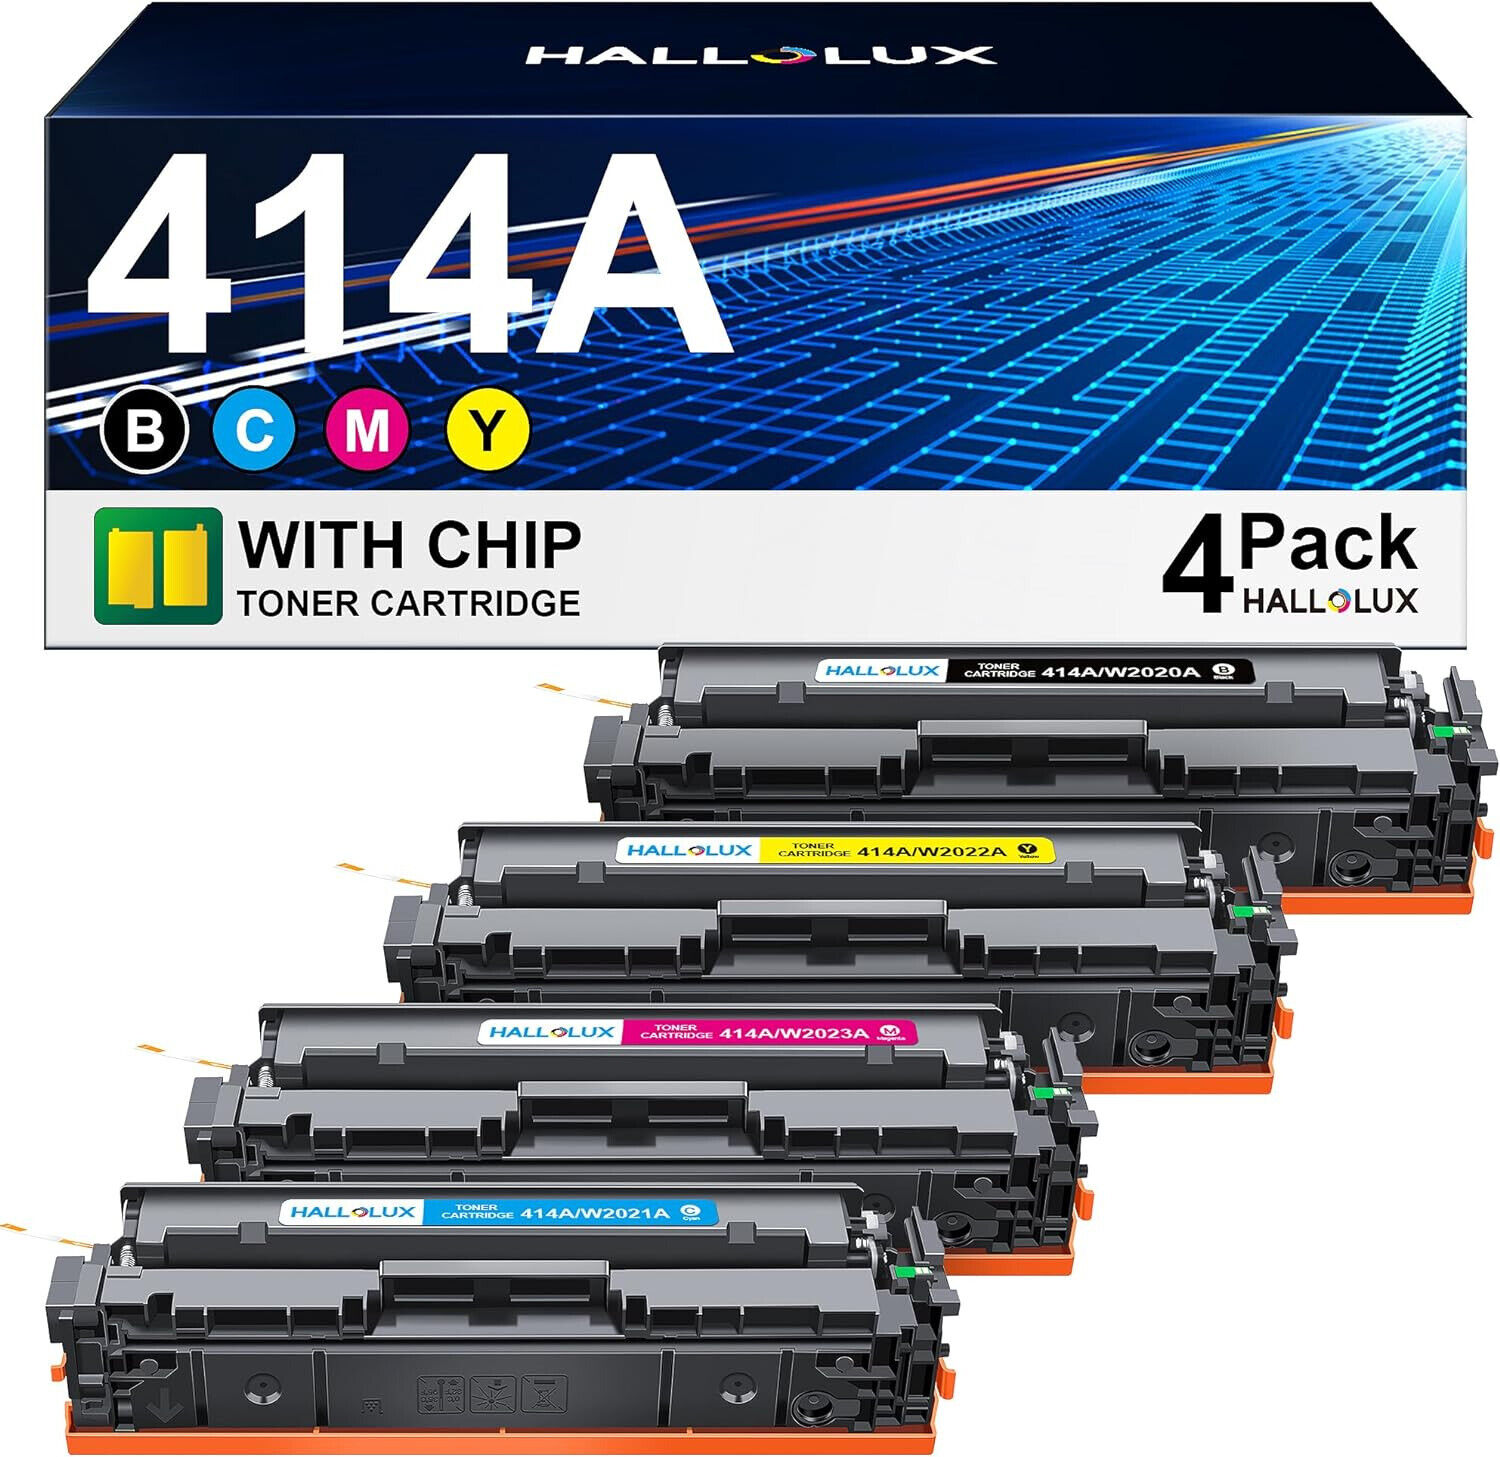 414A Toner Cartridges 4 Pack with Chip Replacement for HP 414A W2020A 414X Compa